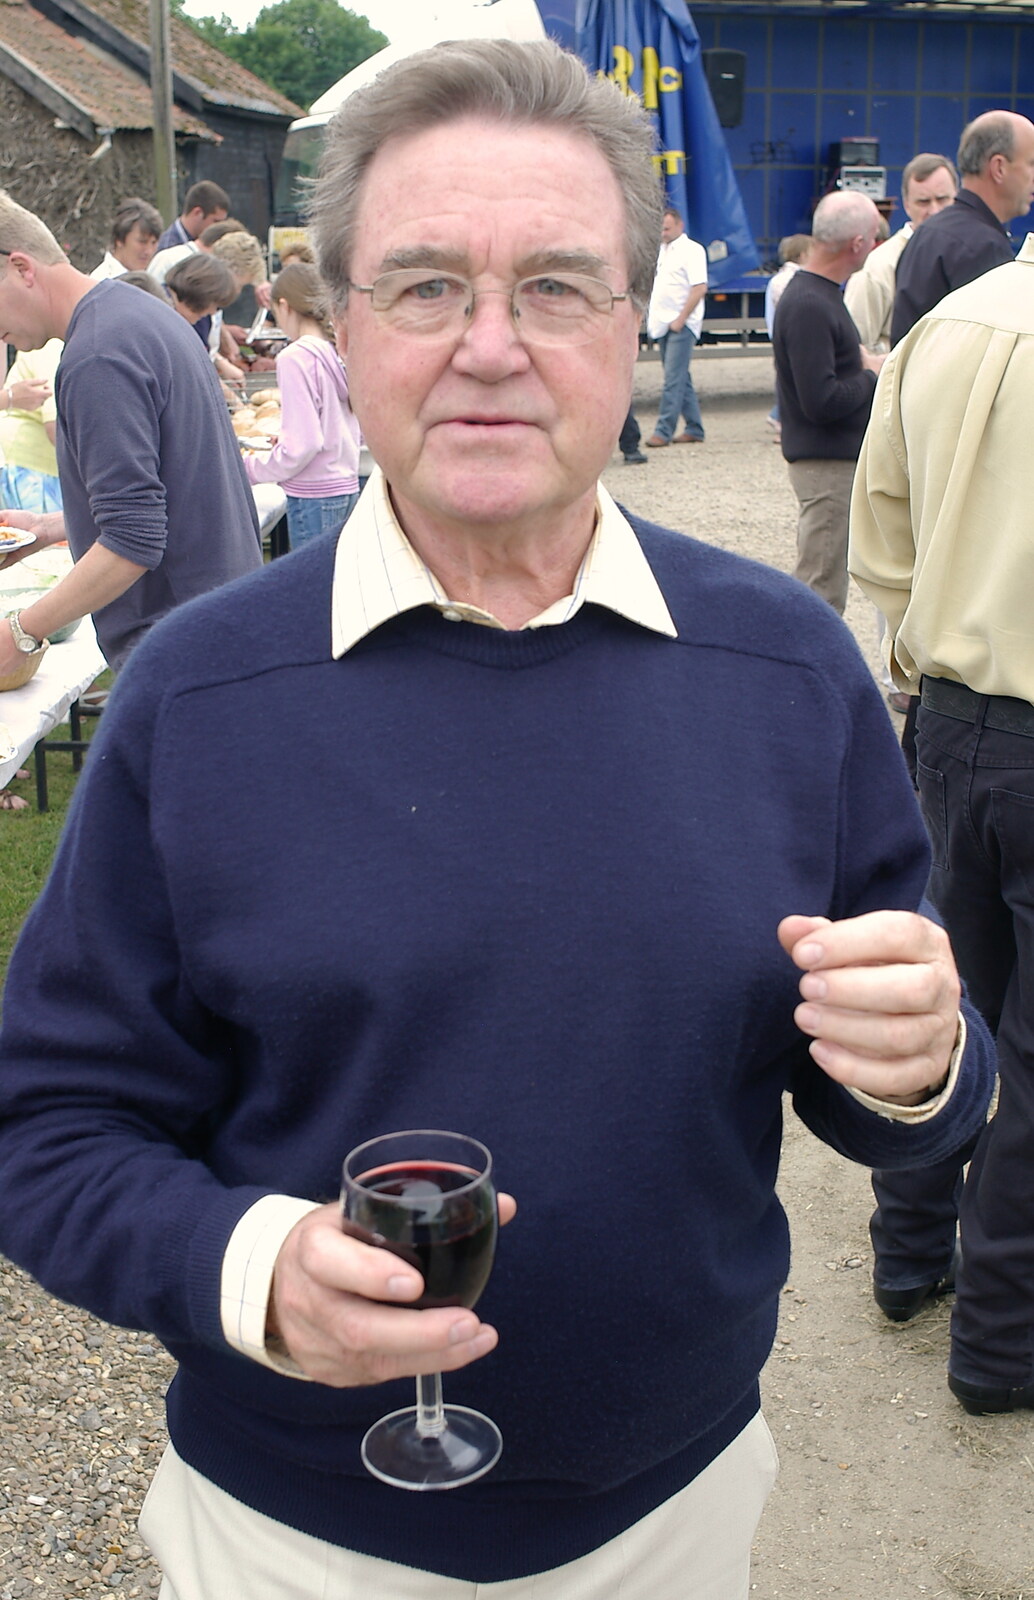 Peter Allen with a glass of red wine from A Combine Harvester and the Pig Roast, Thrandeston, Suffolk - 26th June 2005